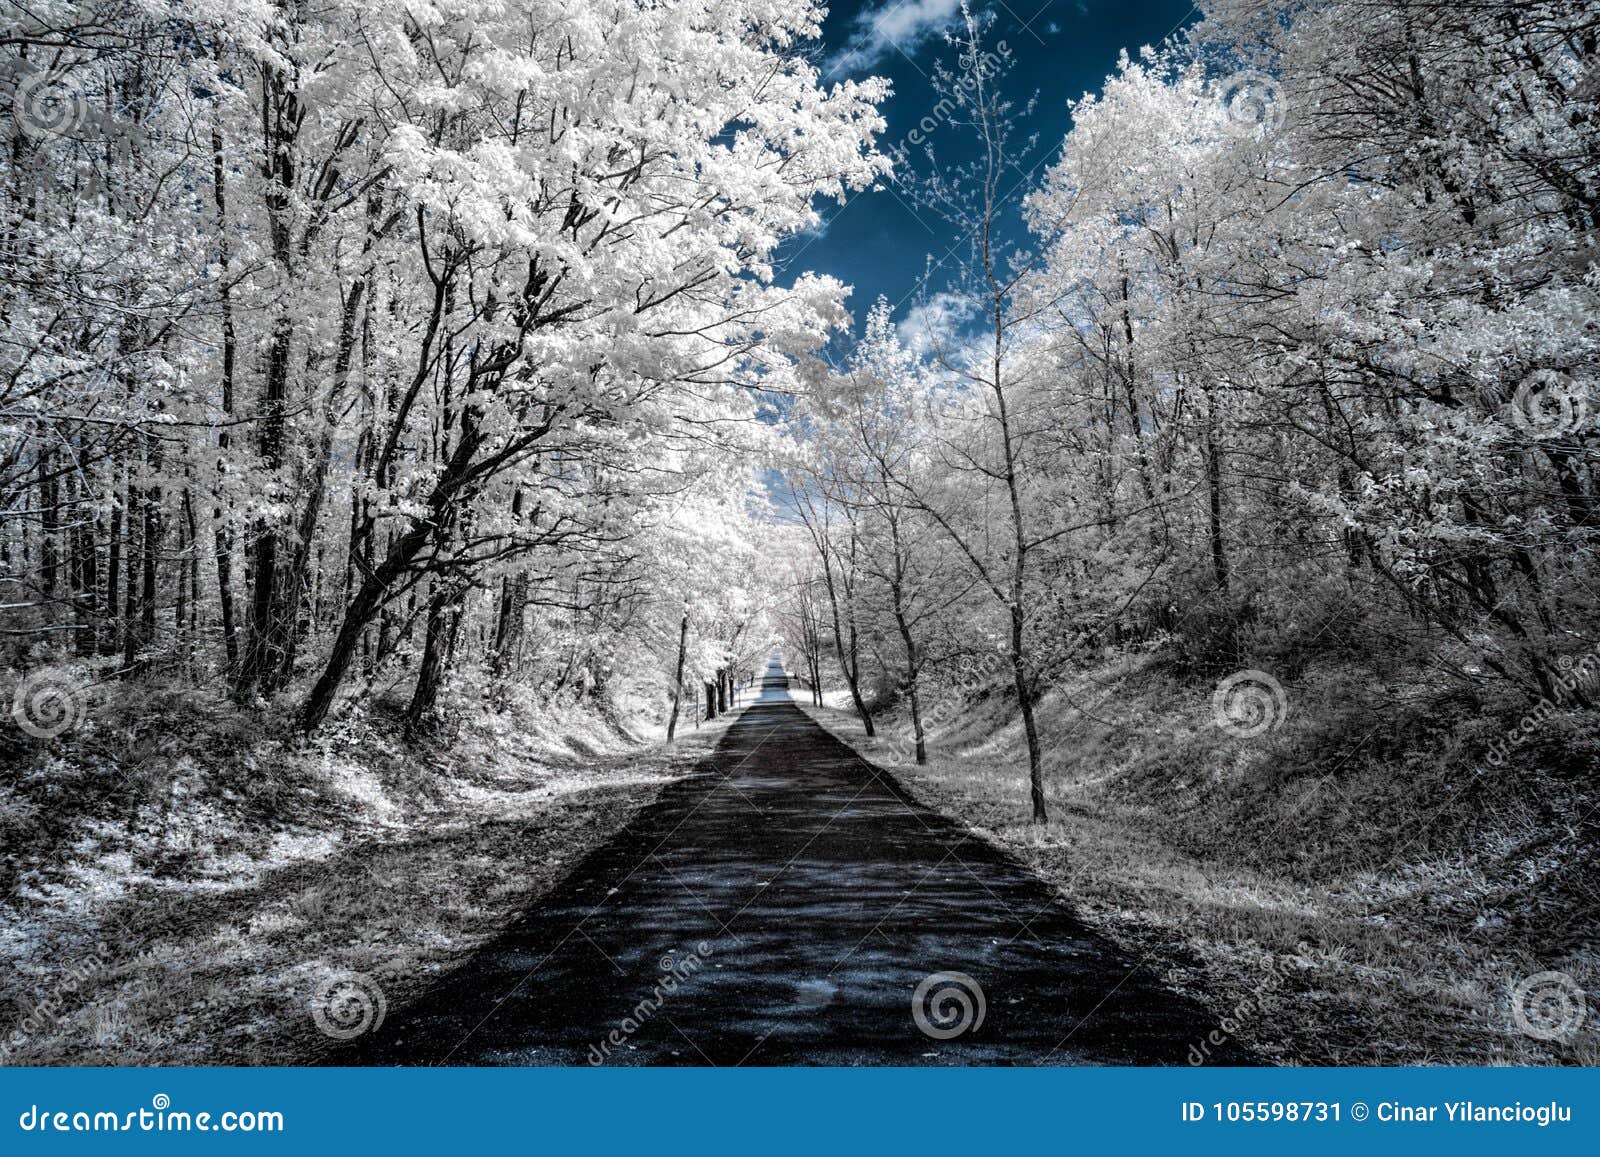 infrared view of trees along a road under blue skies with white